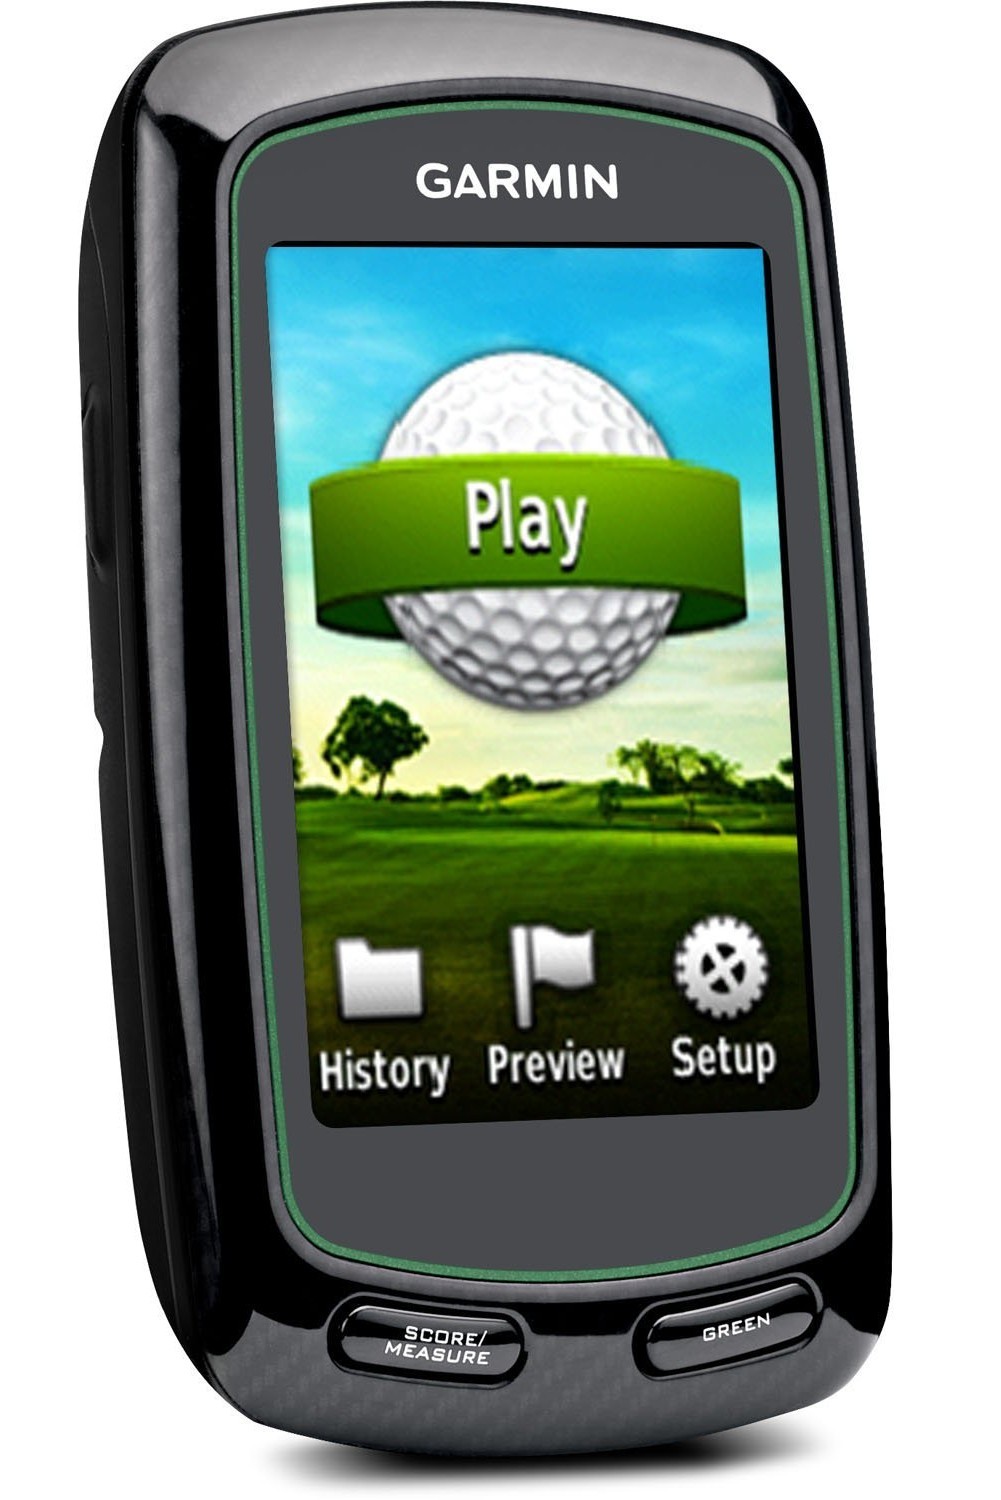 Garmin Approach G6 Handheld Golf Gps Reviewed And Tested In 2017